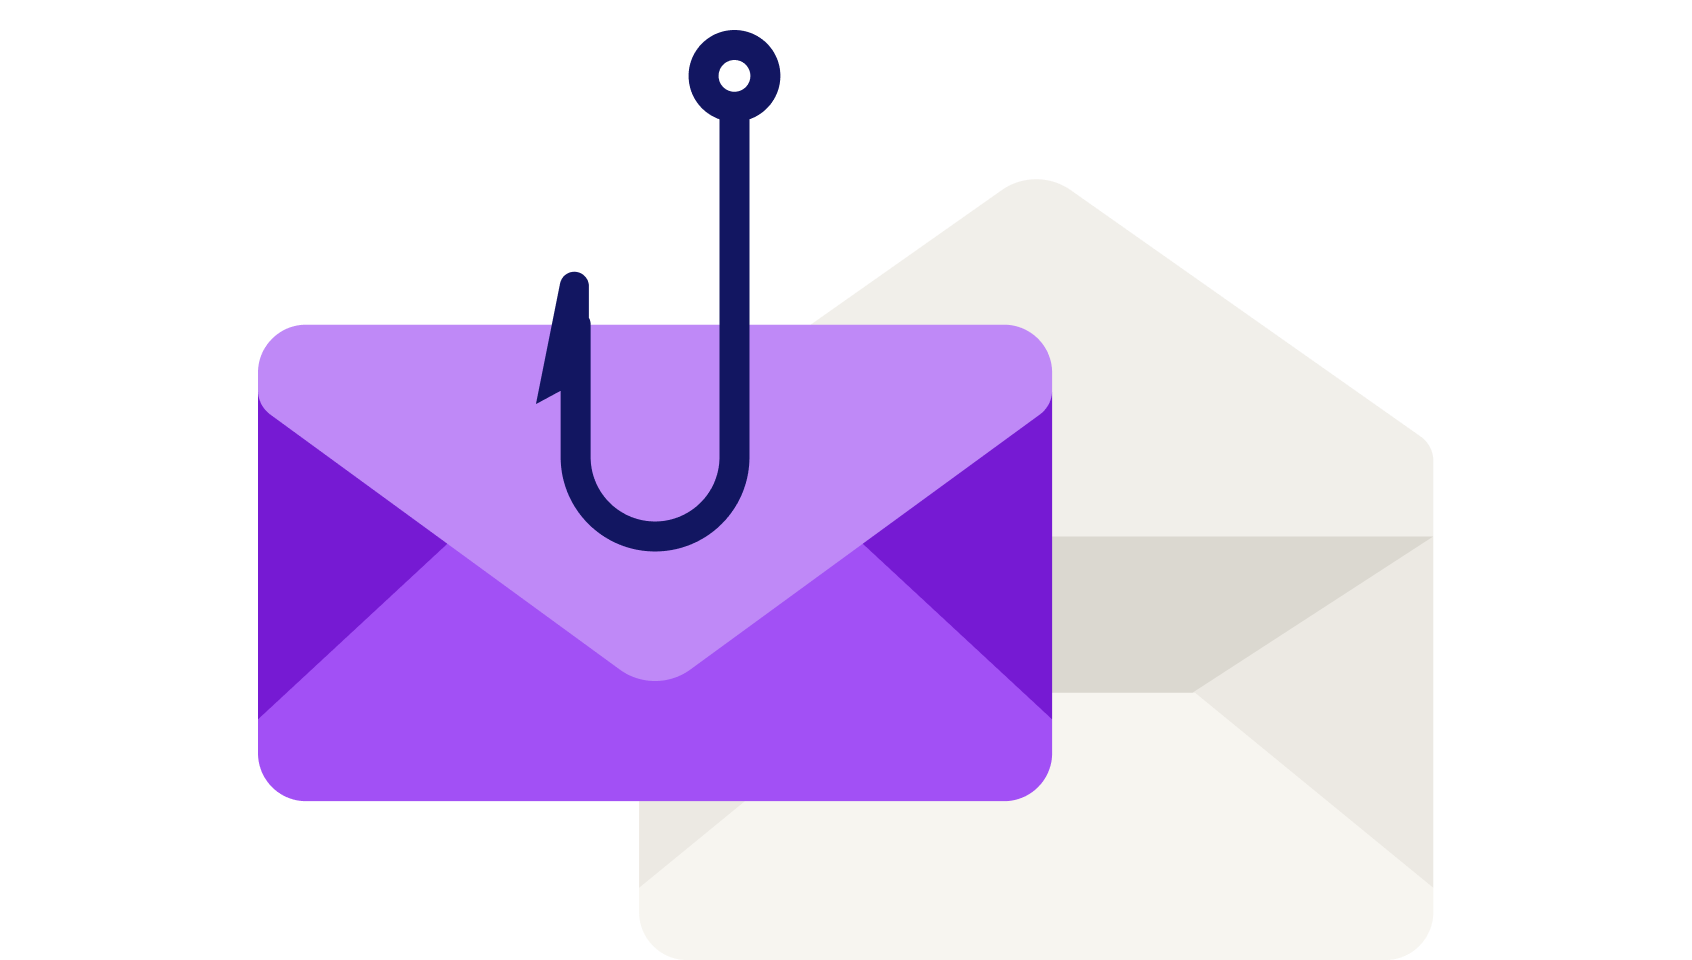 An illustration of a fish hook representing phishing email floats above symbols of two envelopes